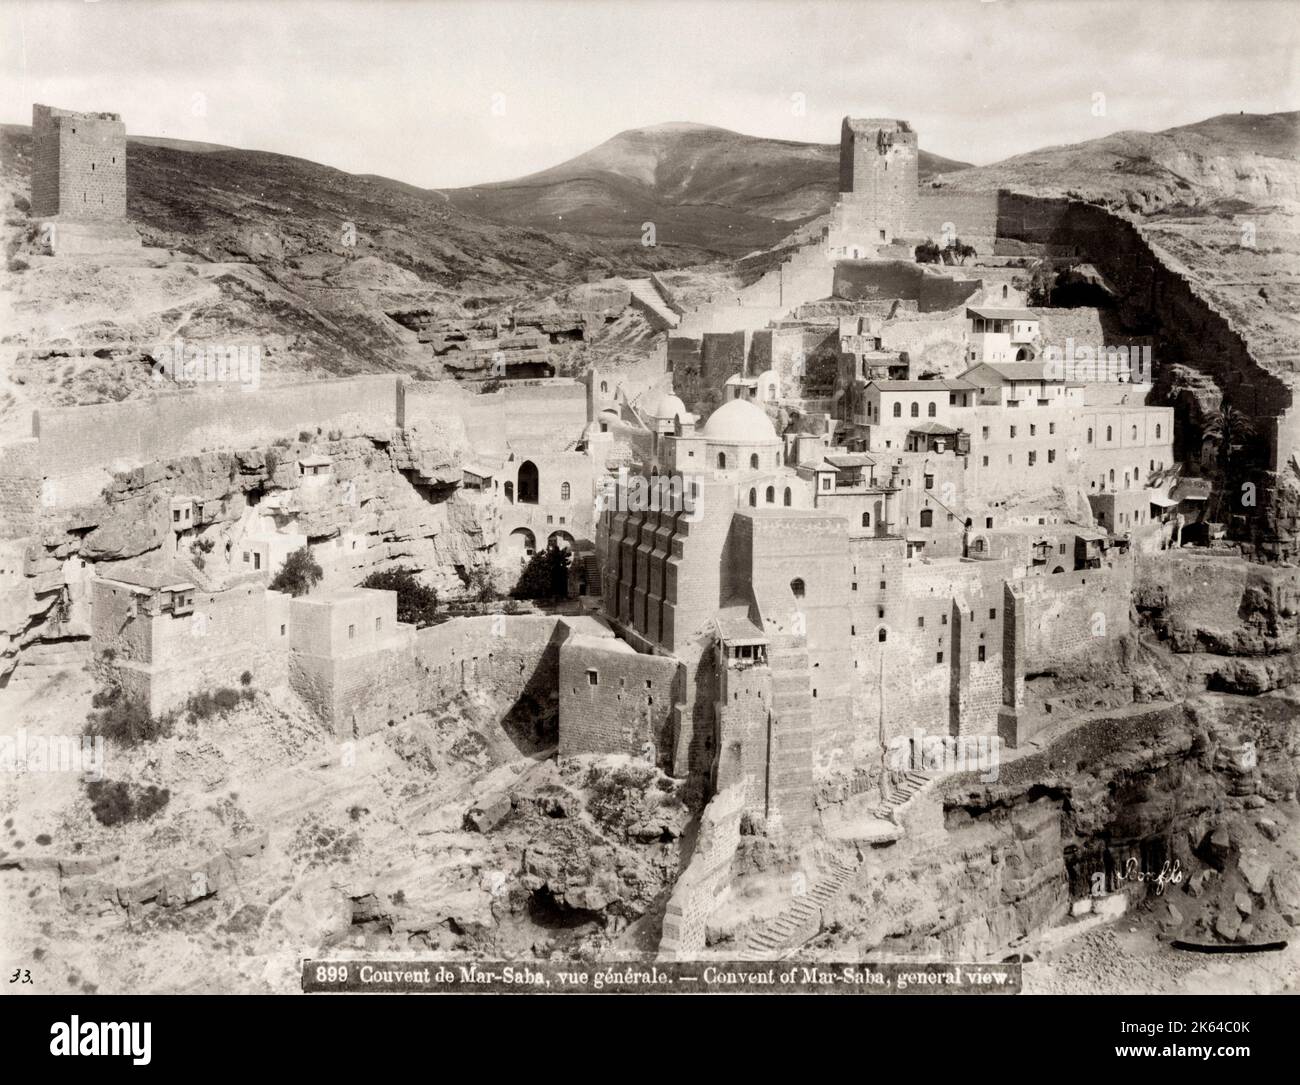 Vintage 19th century  photograph: Convent of Mar Saba. The Holy Lavra of Saint Sabbas, known in Syriac as Mar Saba, is a Greek Orthodox monastery overlooking the Kidron Valley at a point halfway between the Old City of Jerusalem and the Dead Sea, within the Bethlehem Governorate of the West Bank. The monks of Mar Saba and those of subsidiary houses are known as Sabaites. Image c.1890 Stock Photo